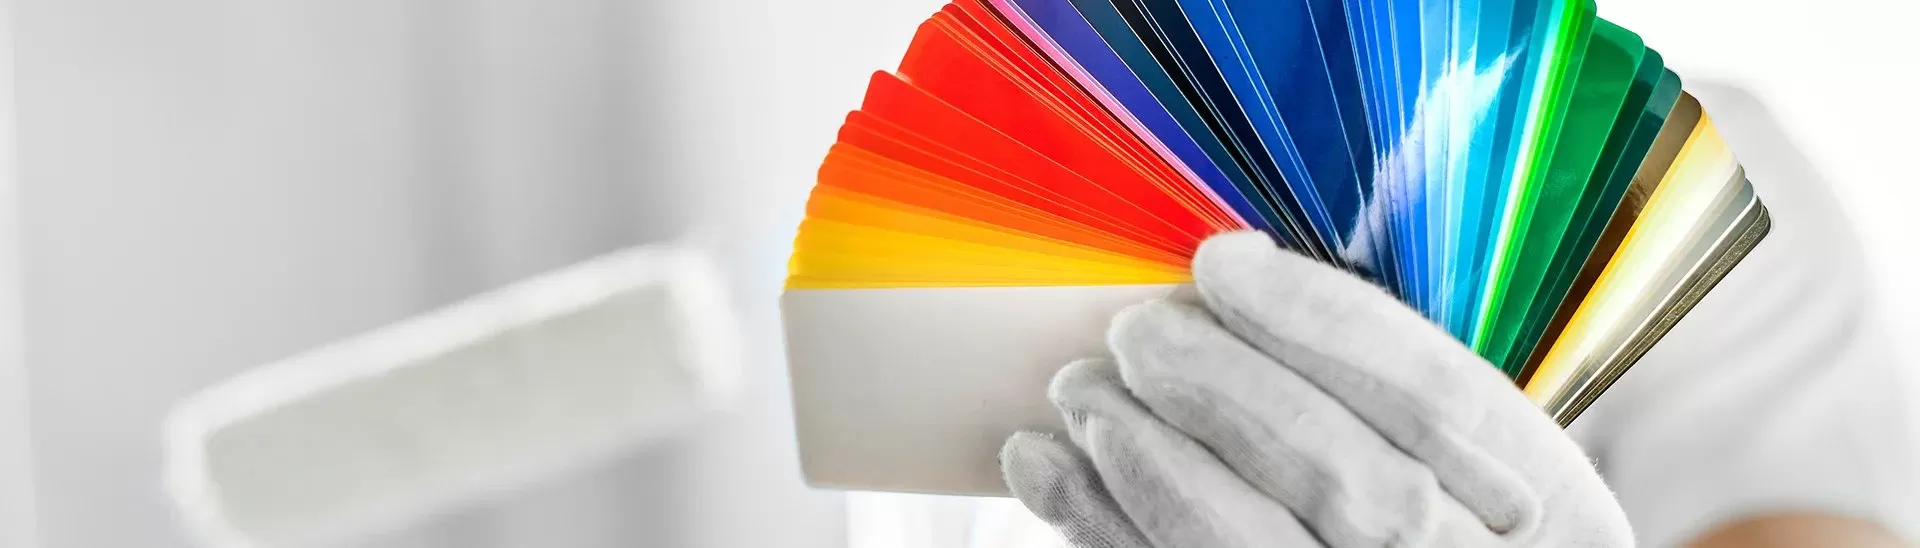 Nerolac NXTGEN Home Painter Services: Your Path to a Stunning Home Transformation